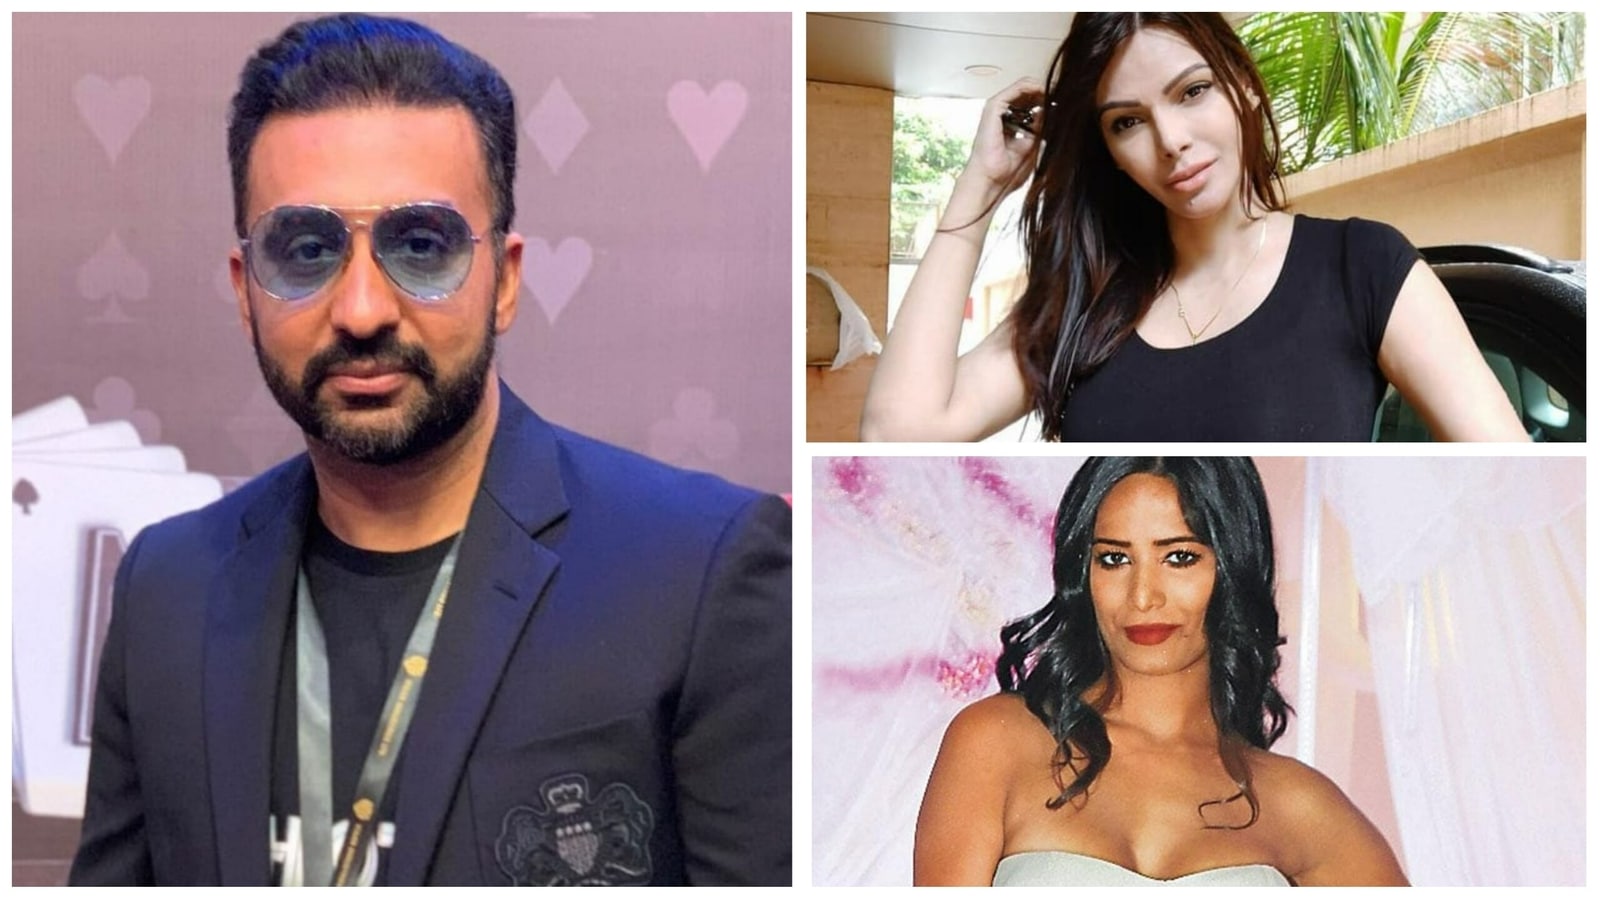 Raj Kundra, Poonam Pandey, Sherlyn Chopra granted anticipatory bail by Supreme Court in pornography case